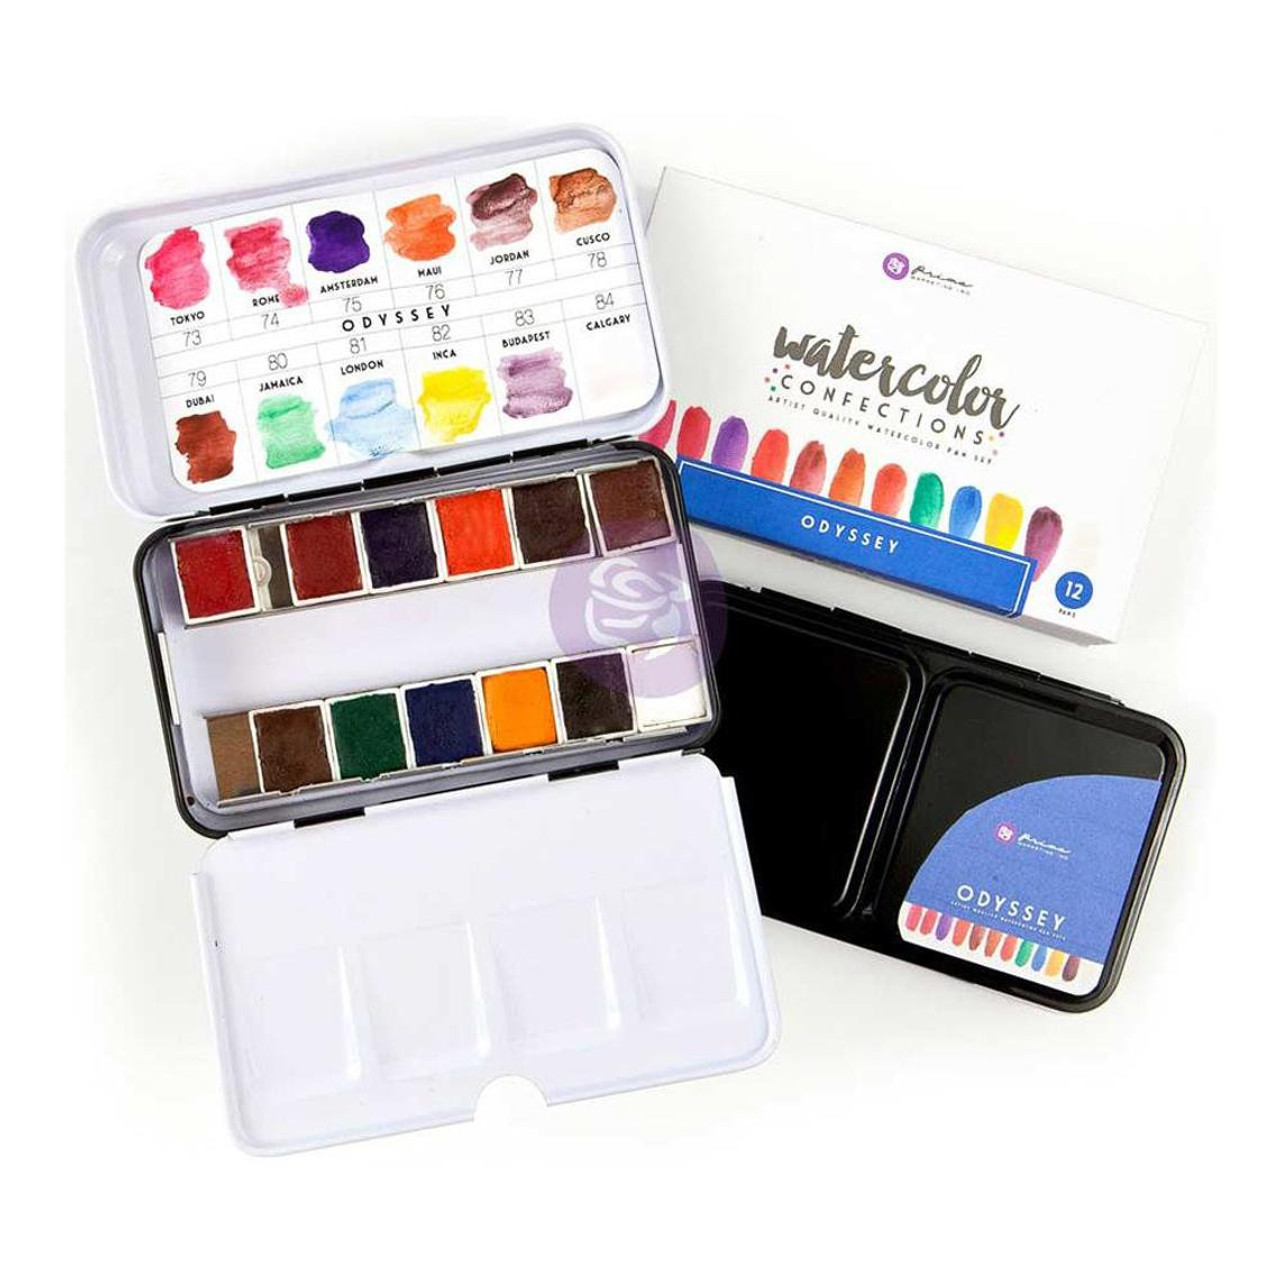 Odyssey - Prima Marketing Watercolor Paint Confections: 12-Color Half Pan Set in Metal Box - Bible Journaling Supplies